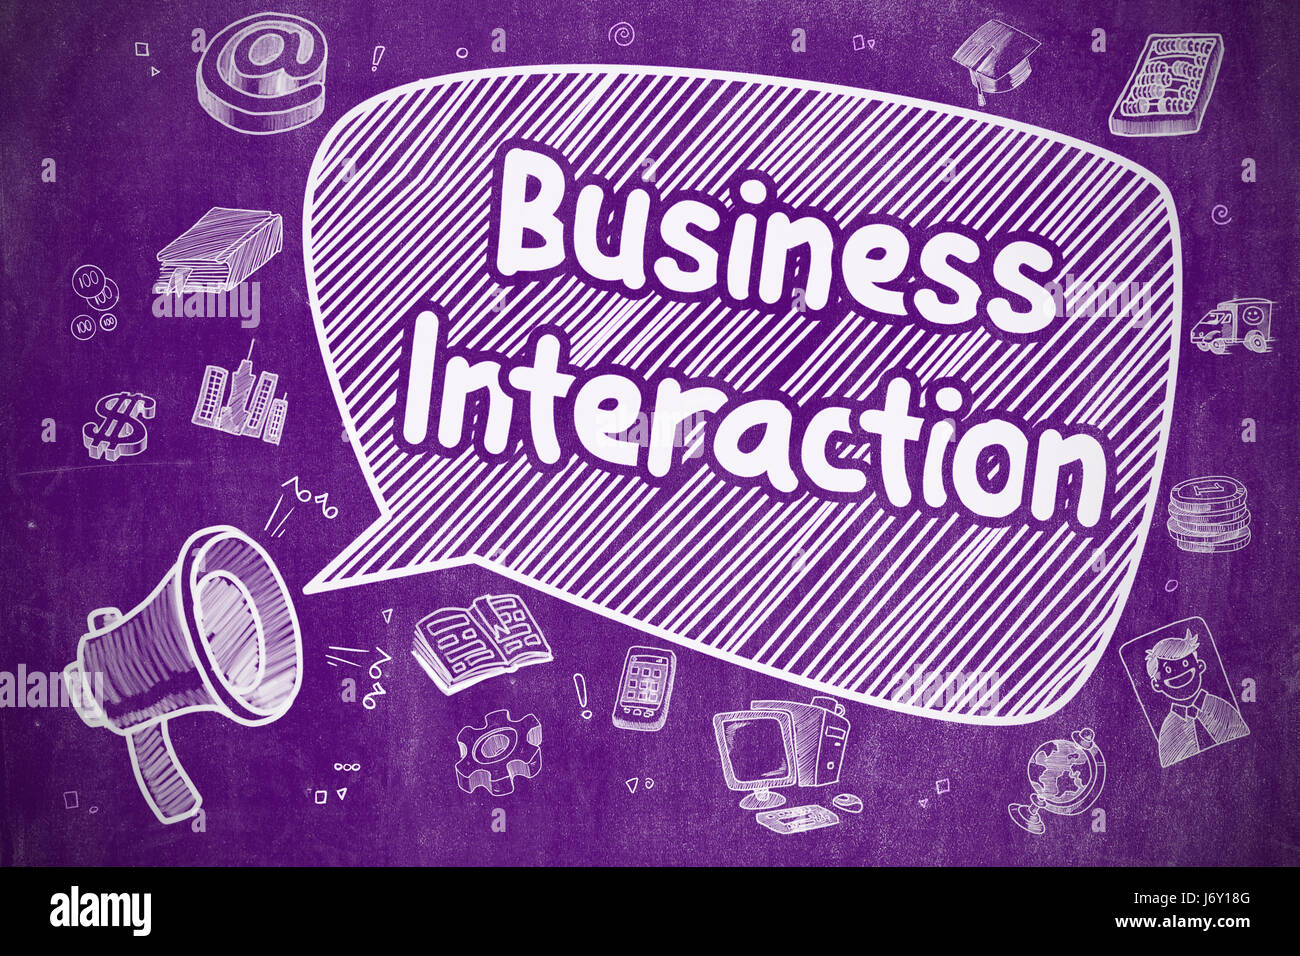 Business Interaction - Business Concept. Stock Photo